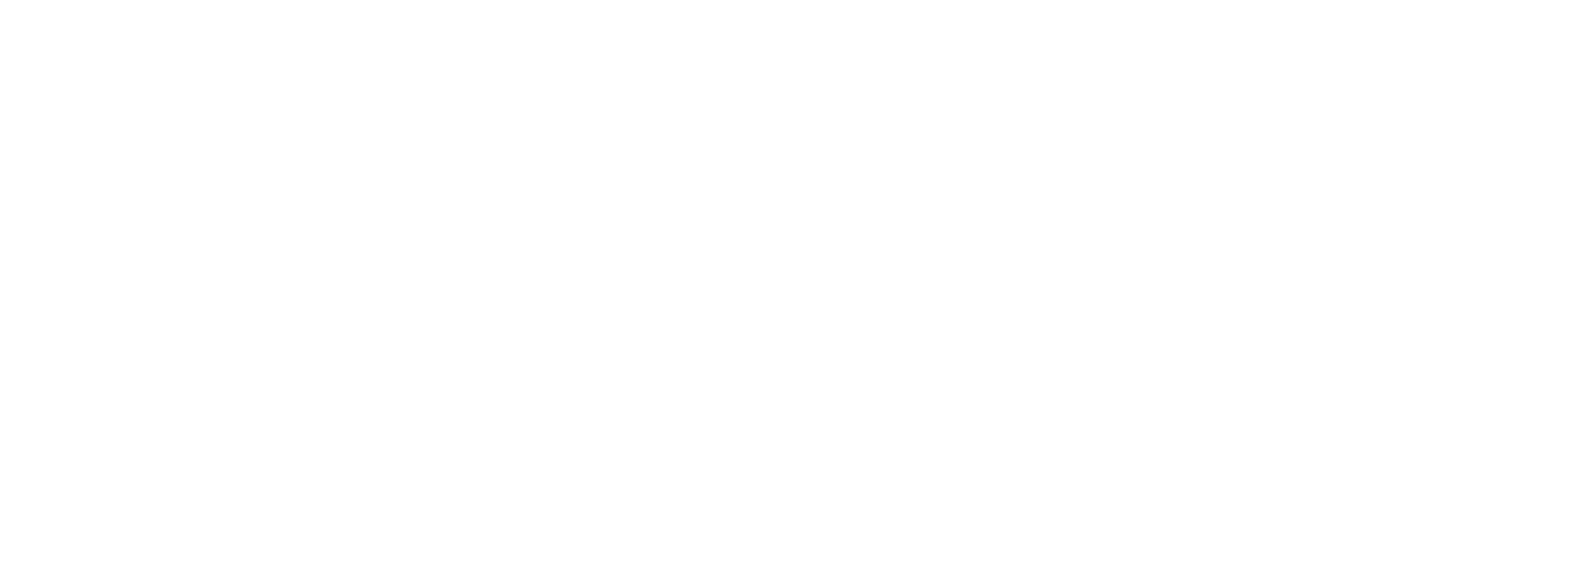 MAKE YOUR MEMORIES BY THE LARGEST STUDIO WITH YOUR LOVE ONES 大切な人とオレンジスタジオ名古屋で自分らしい思い出作りを